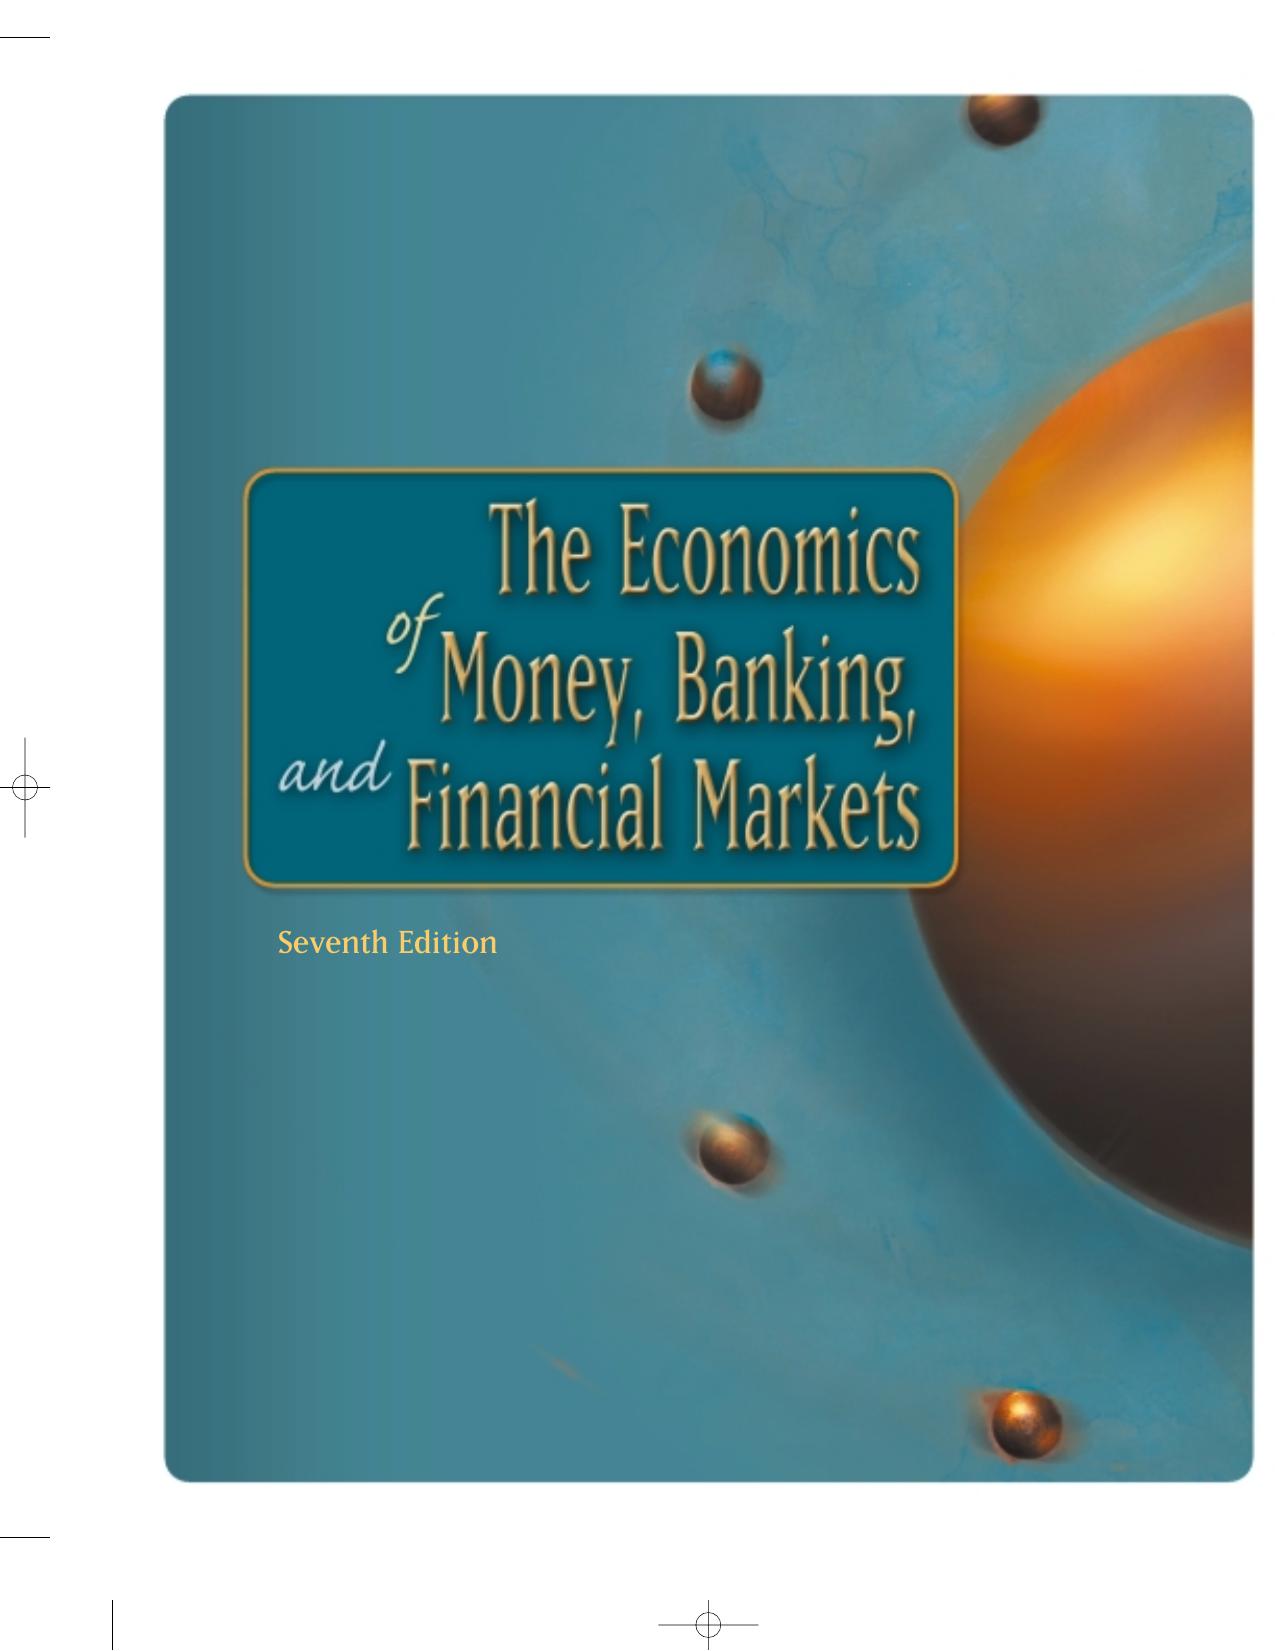 The Economics of Money, Banking, and Financial Markets 7th ed. 2004.pdf